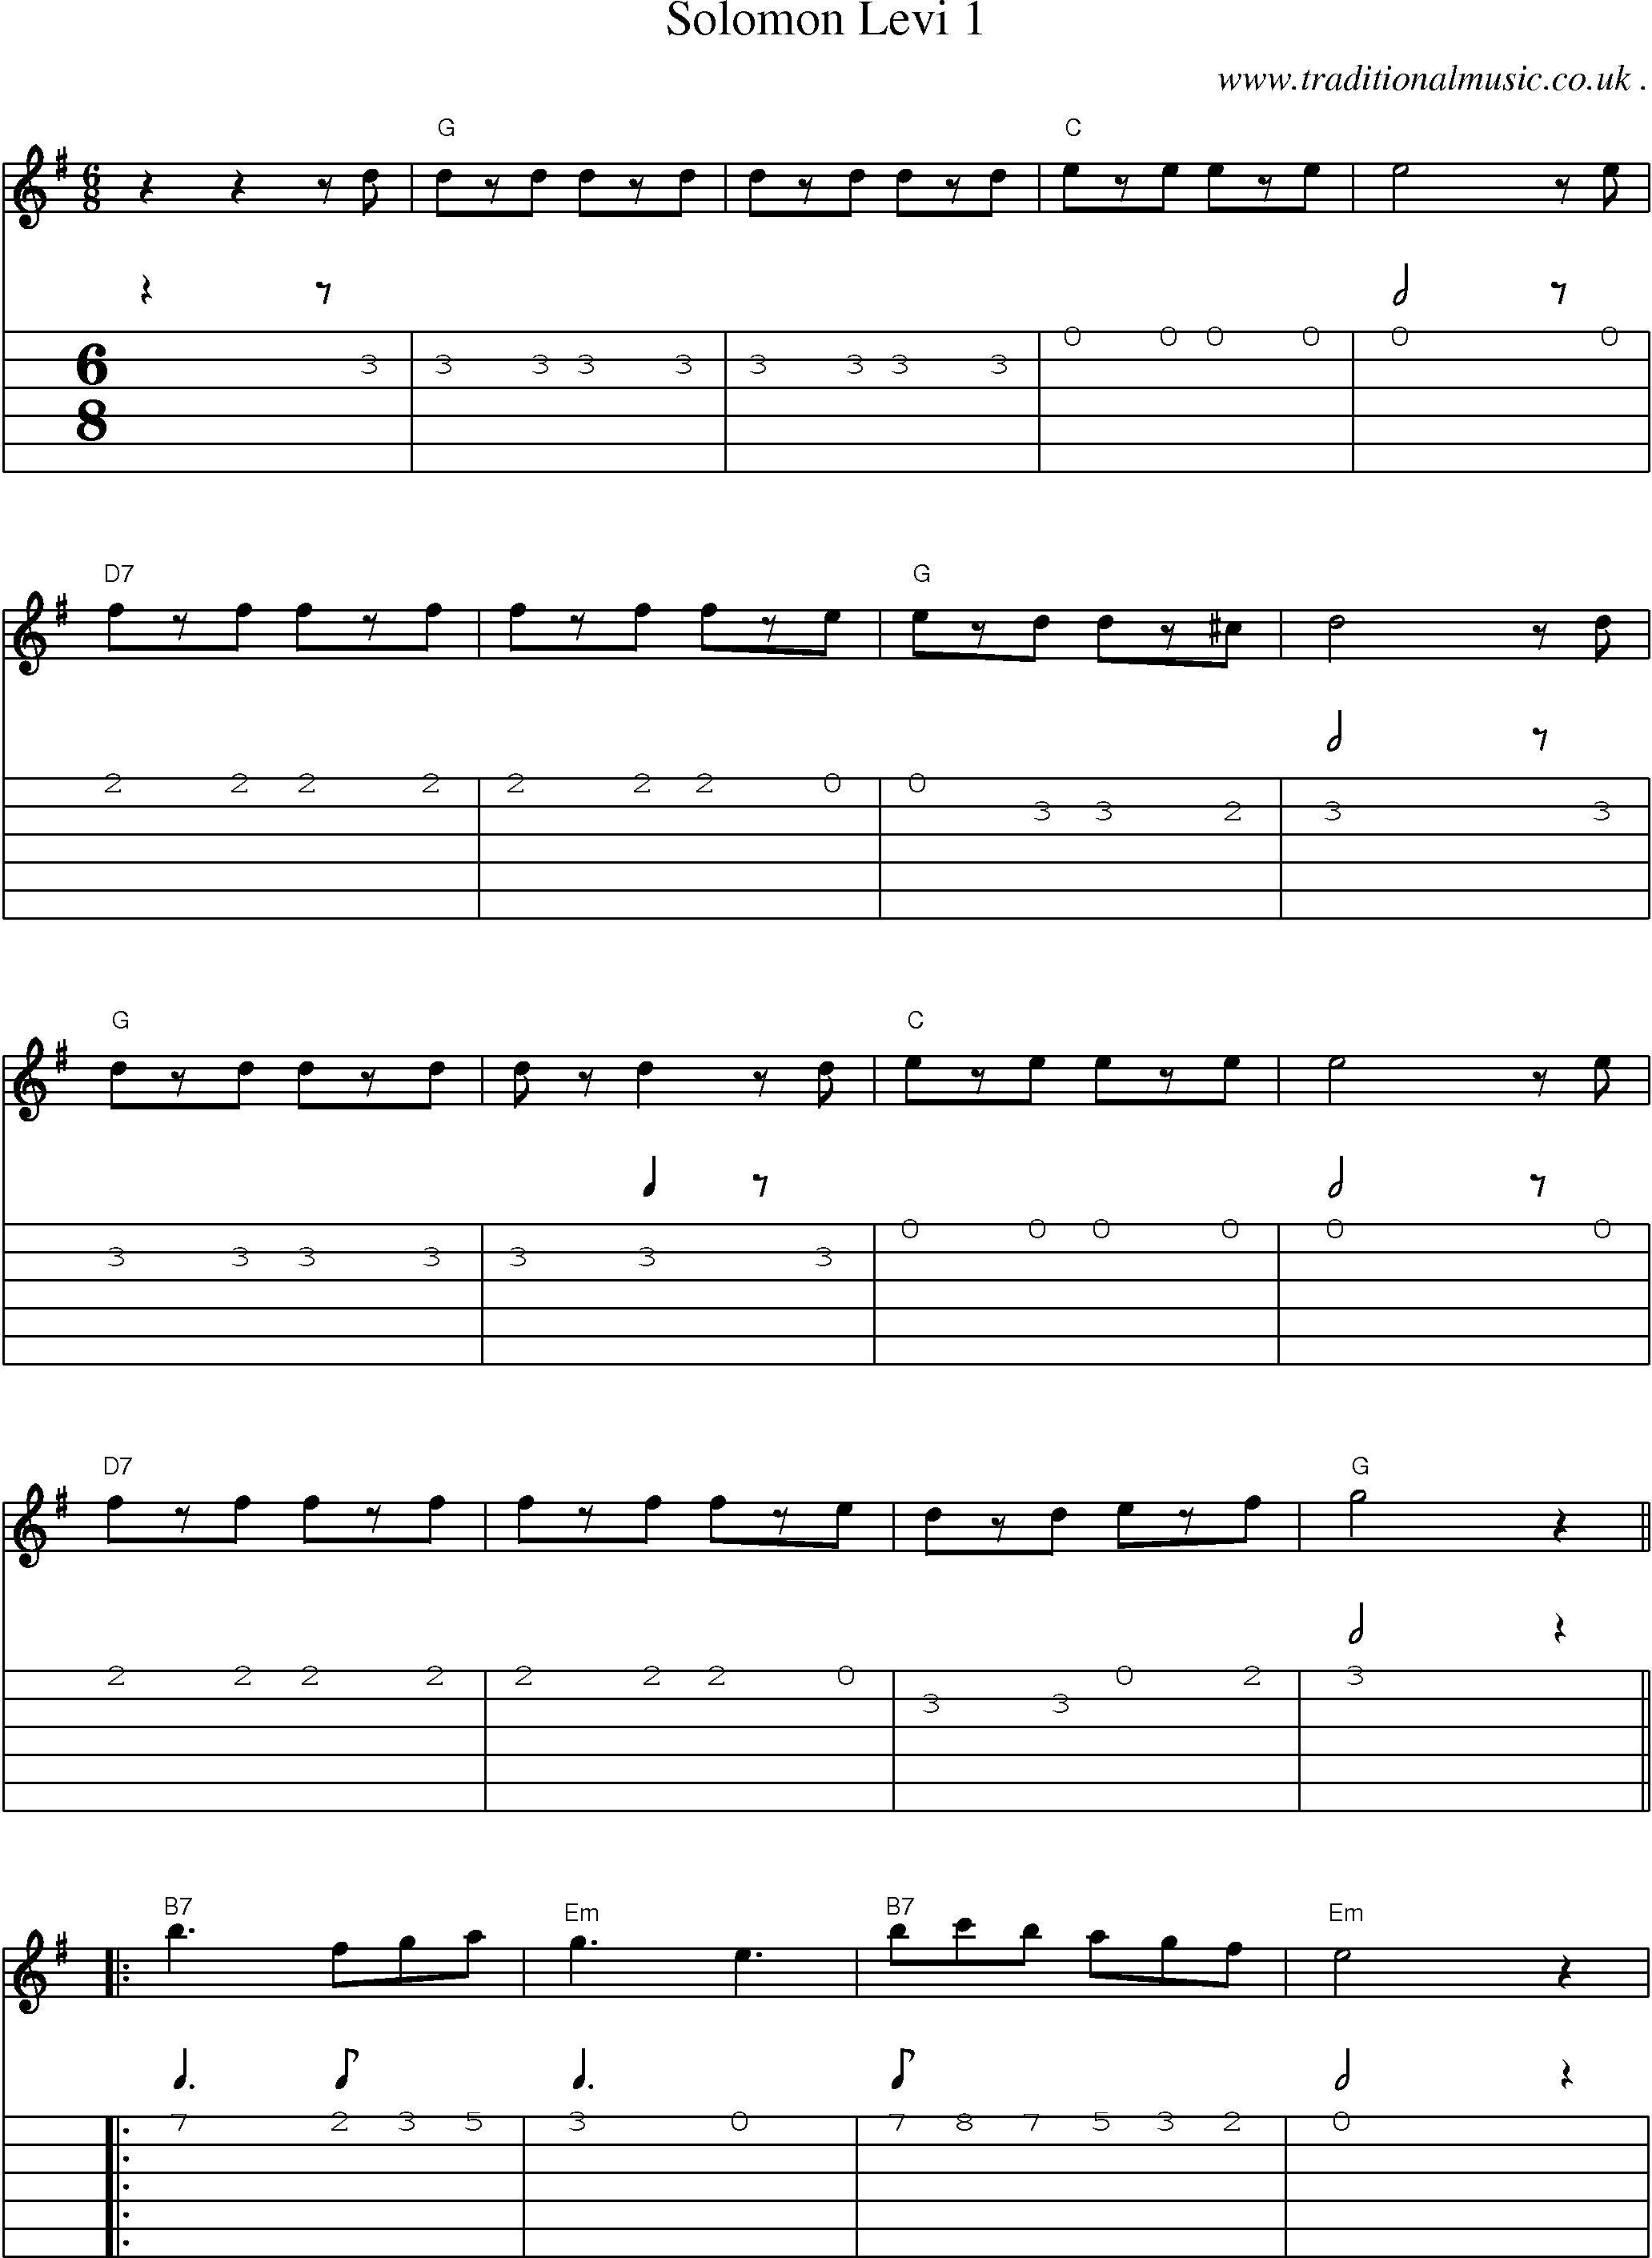 Music Score and Guitar Tabs for Solomon Levi 1